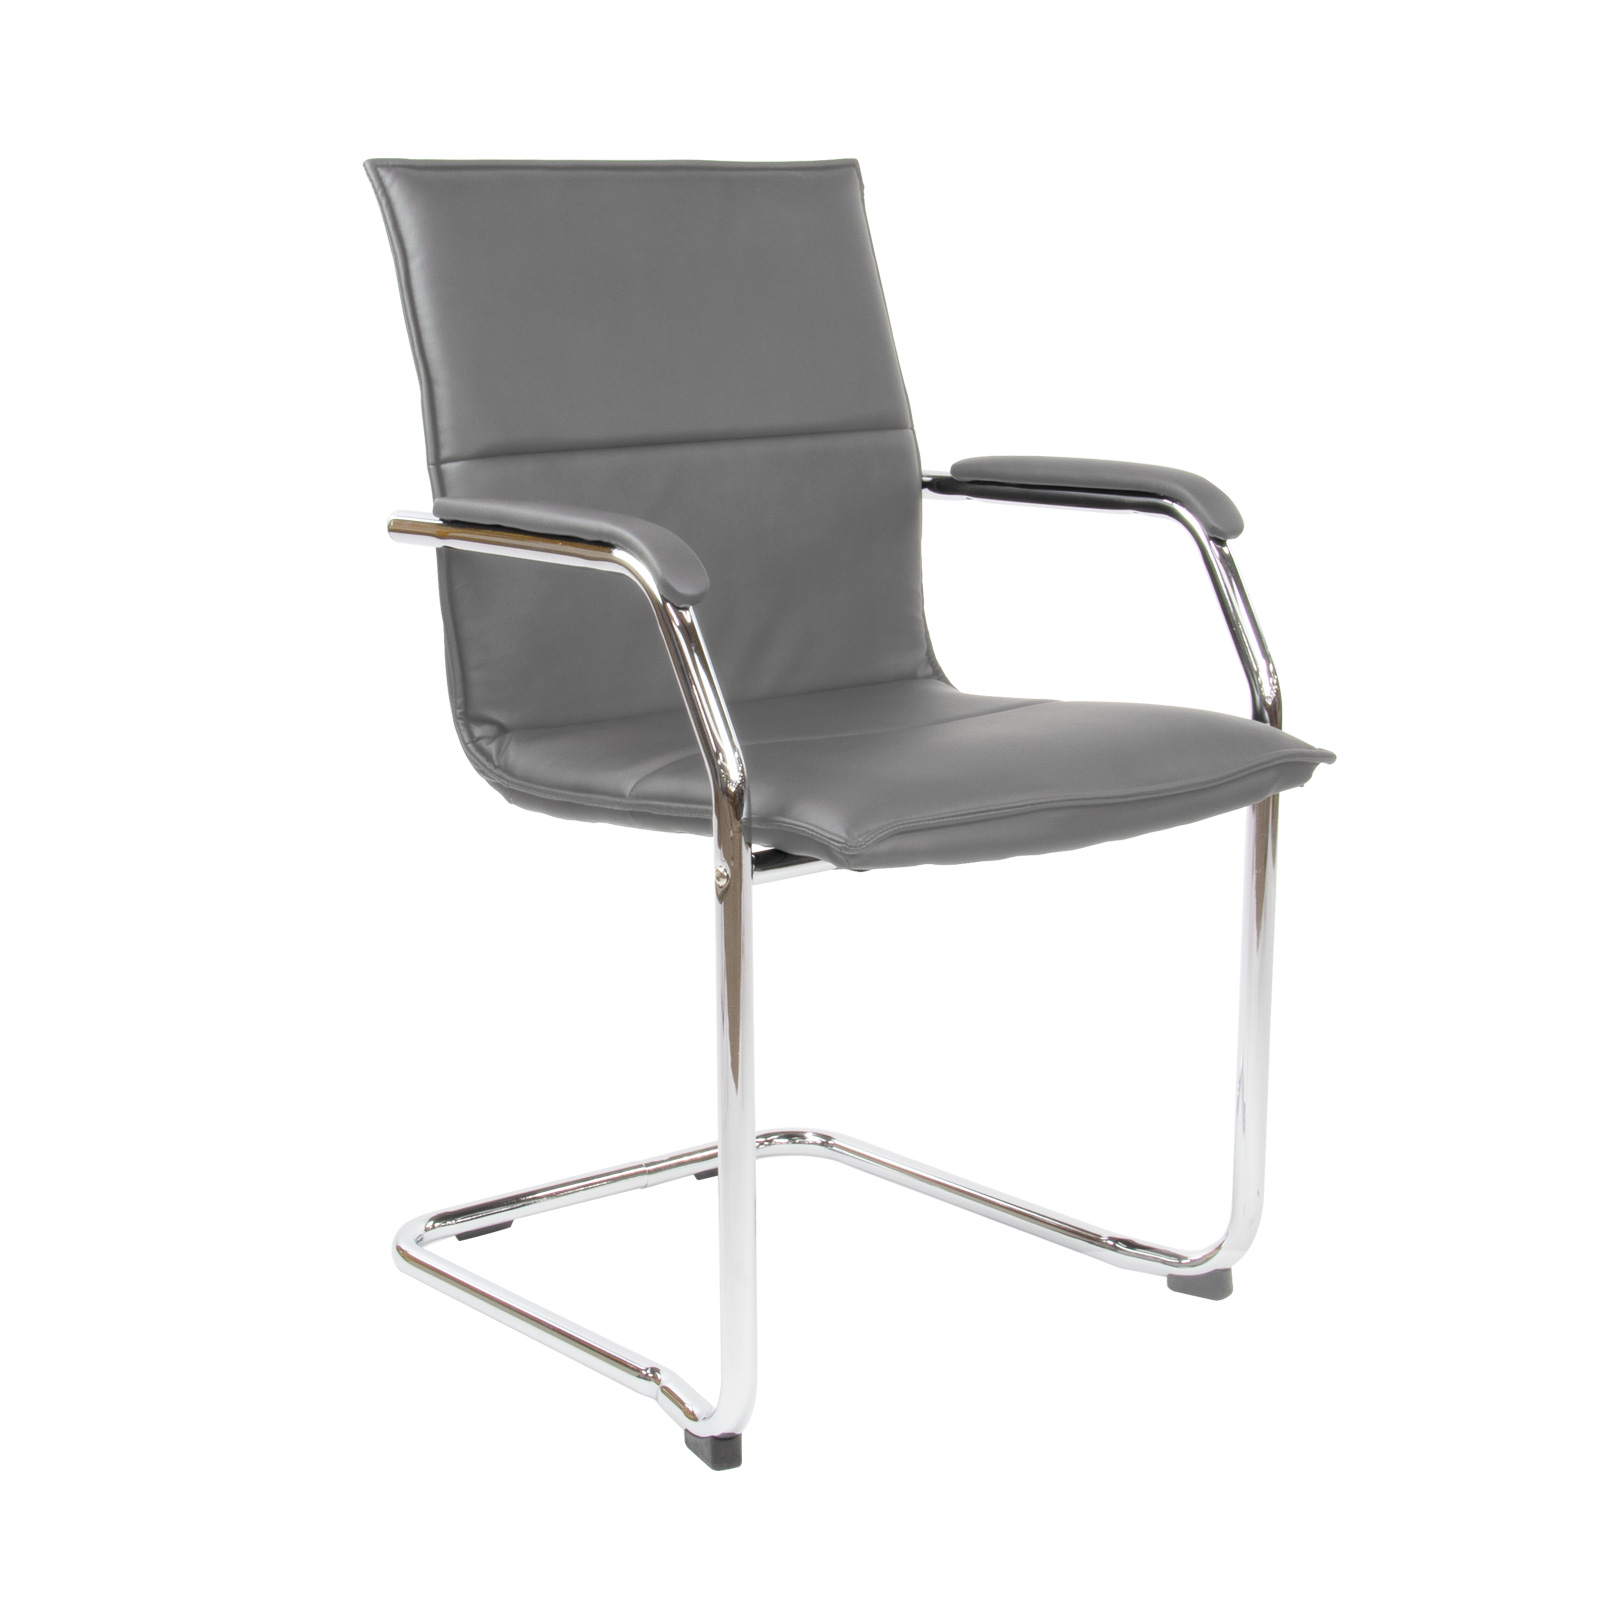 Boardroom / Meeting Essen stackable meeting room cantilever chair - grey faux leather